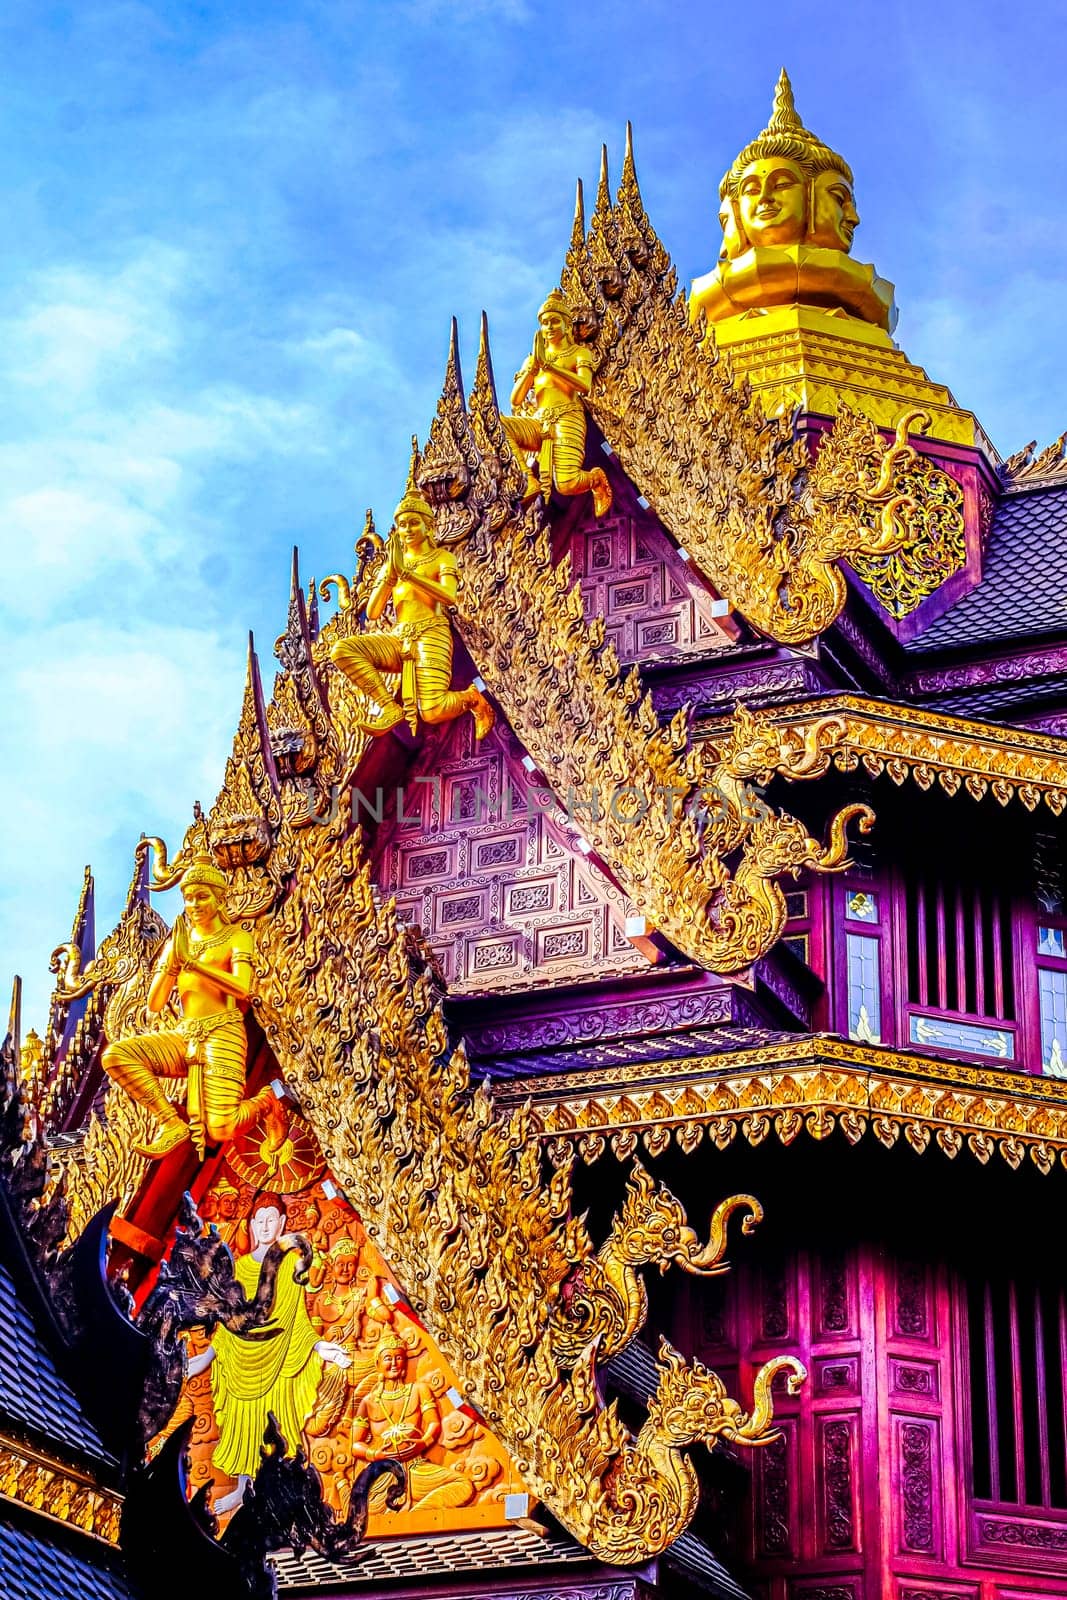 Traditional Thai Style Animal Gods Carved on Roof Decorations Against a Blue Sky